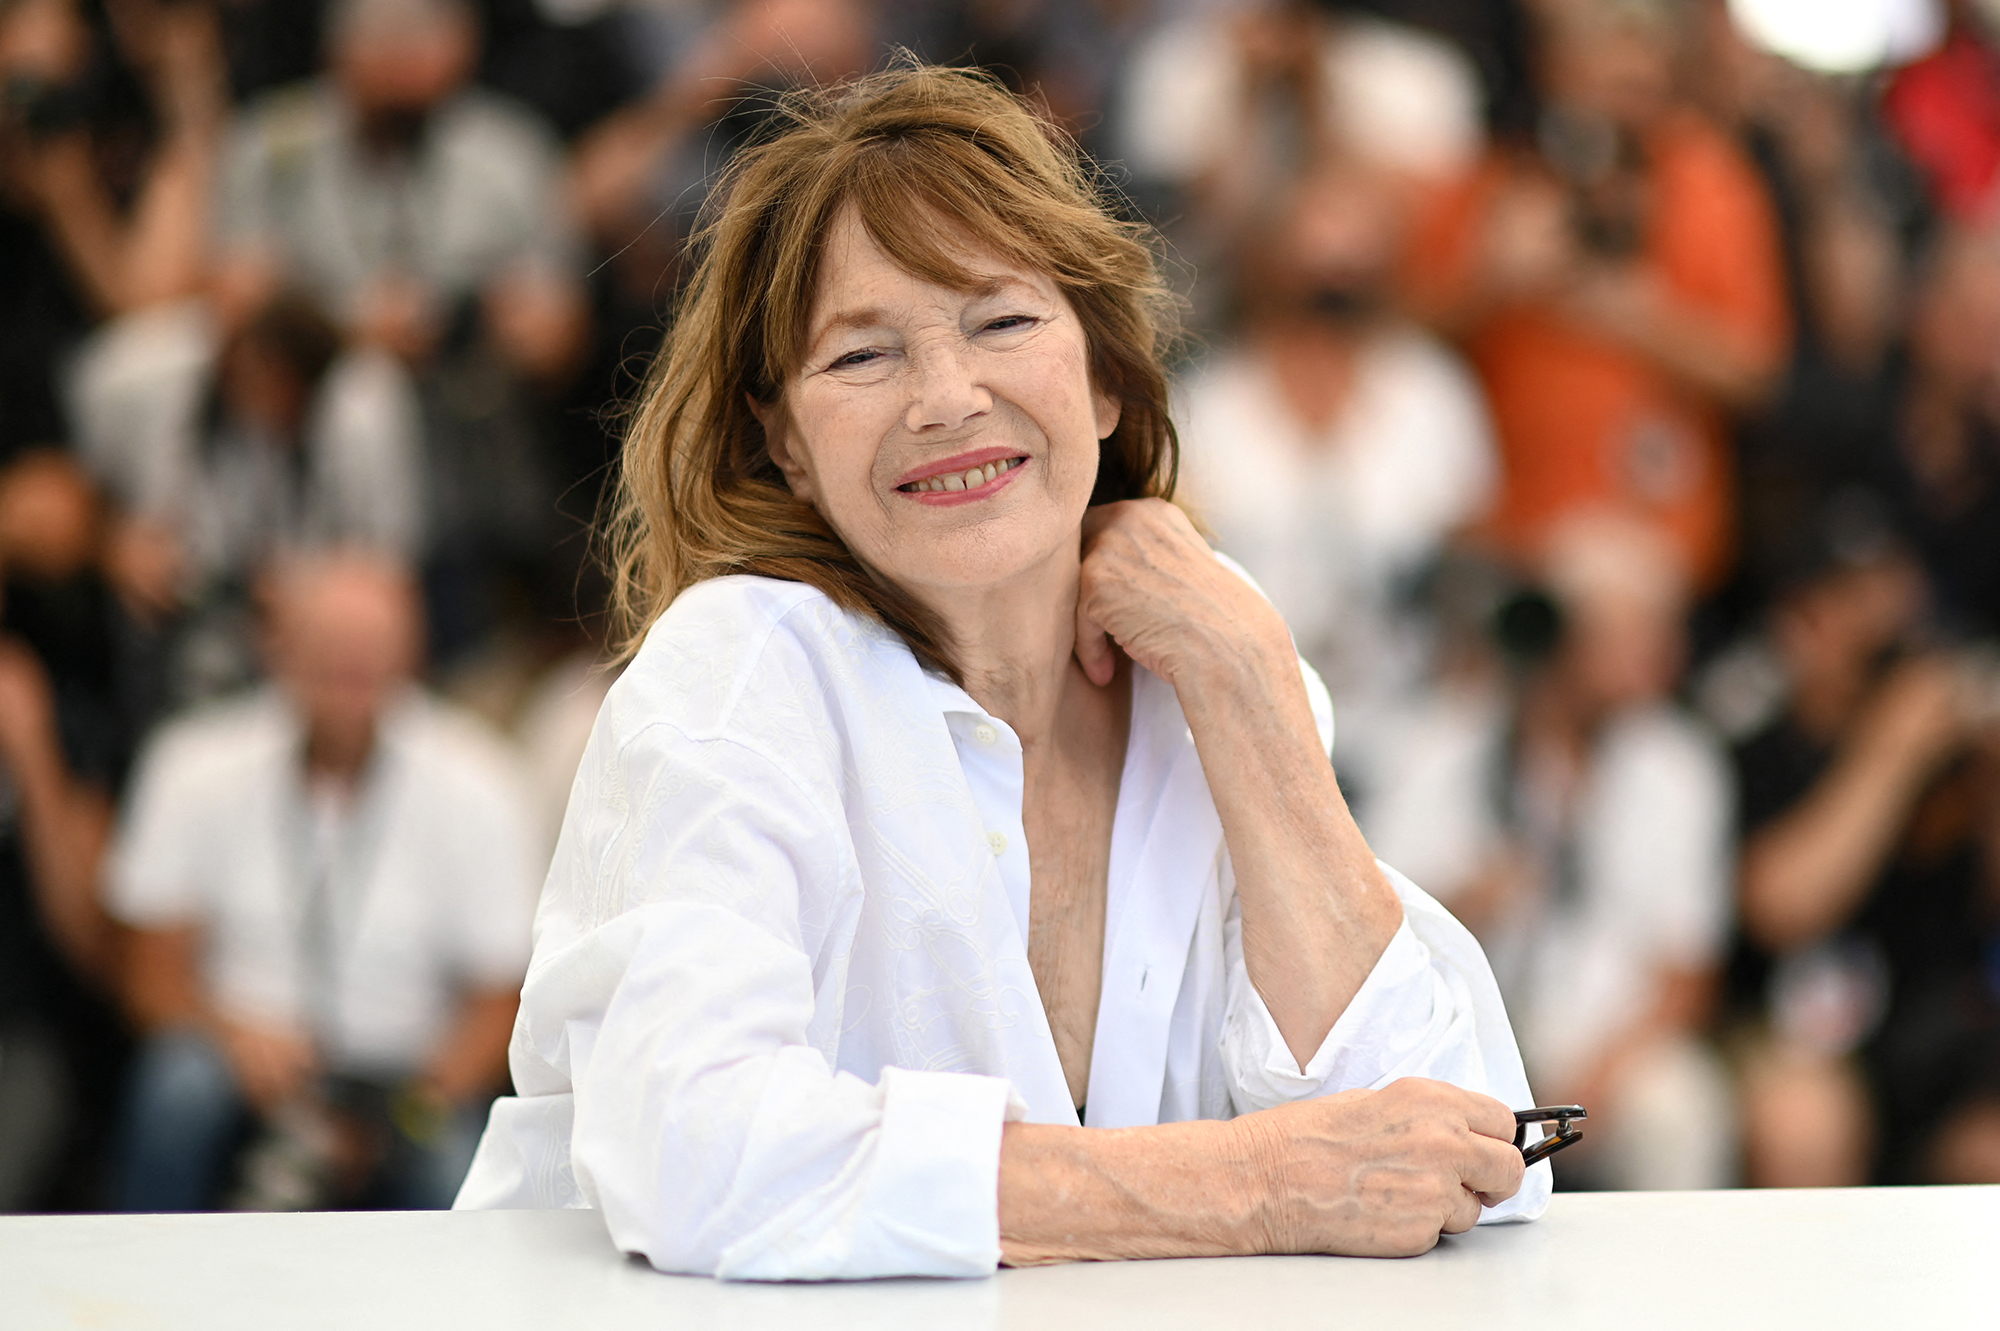 Who Is Jane Birkin? What to Know About the Woman Who Inspired the Bag